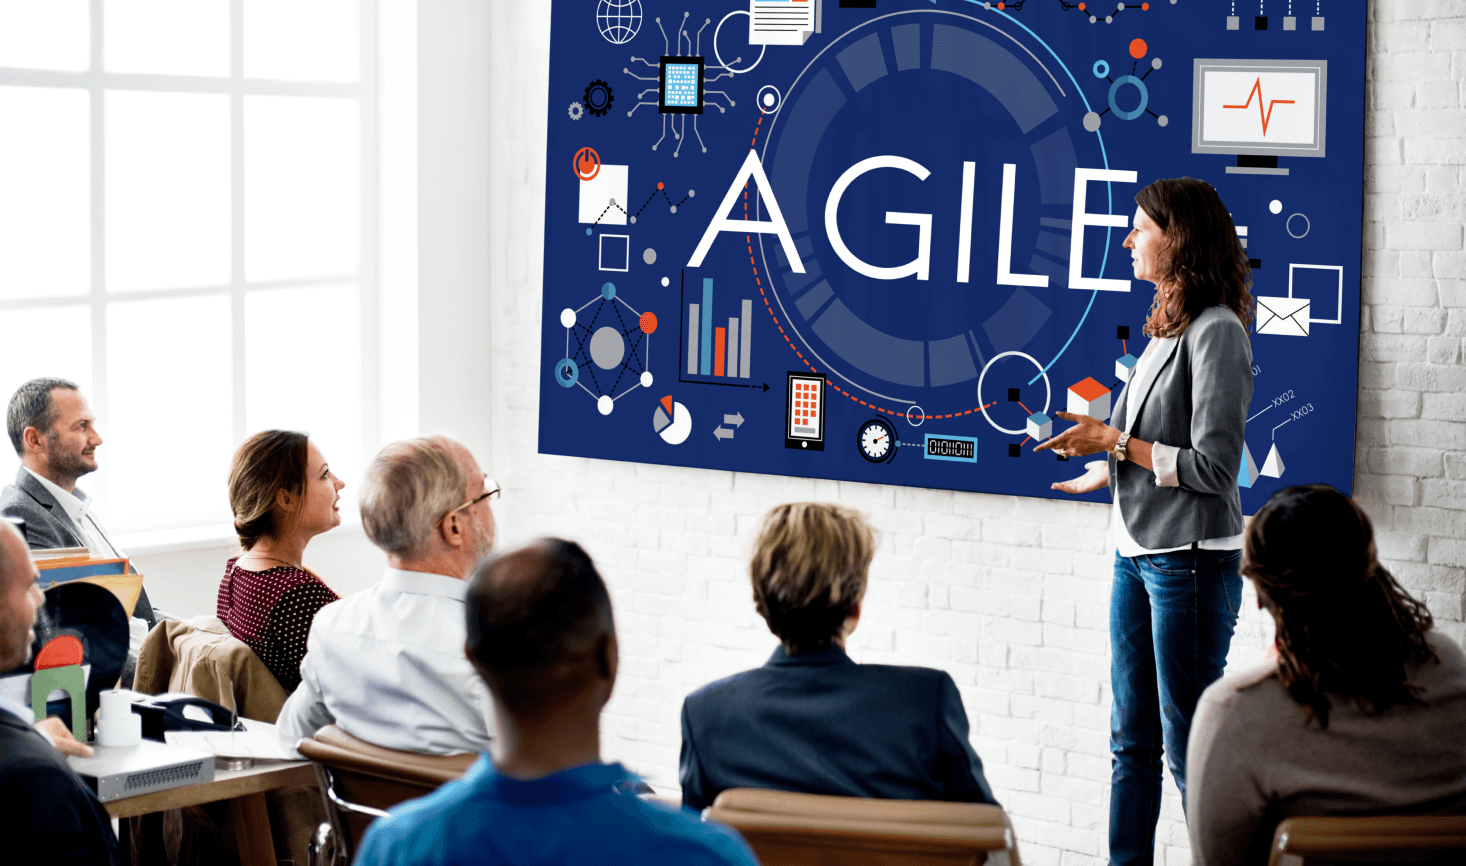 What Is Agile Methodology? - Overview Of Agile Software Development And Agile Models